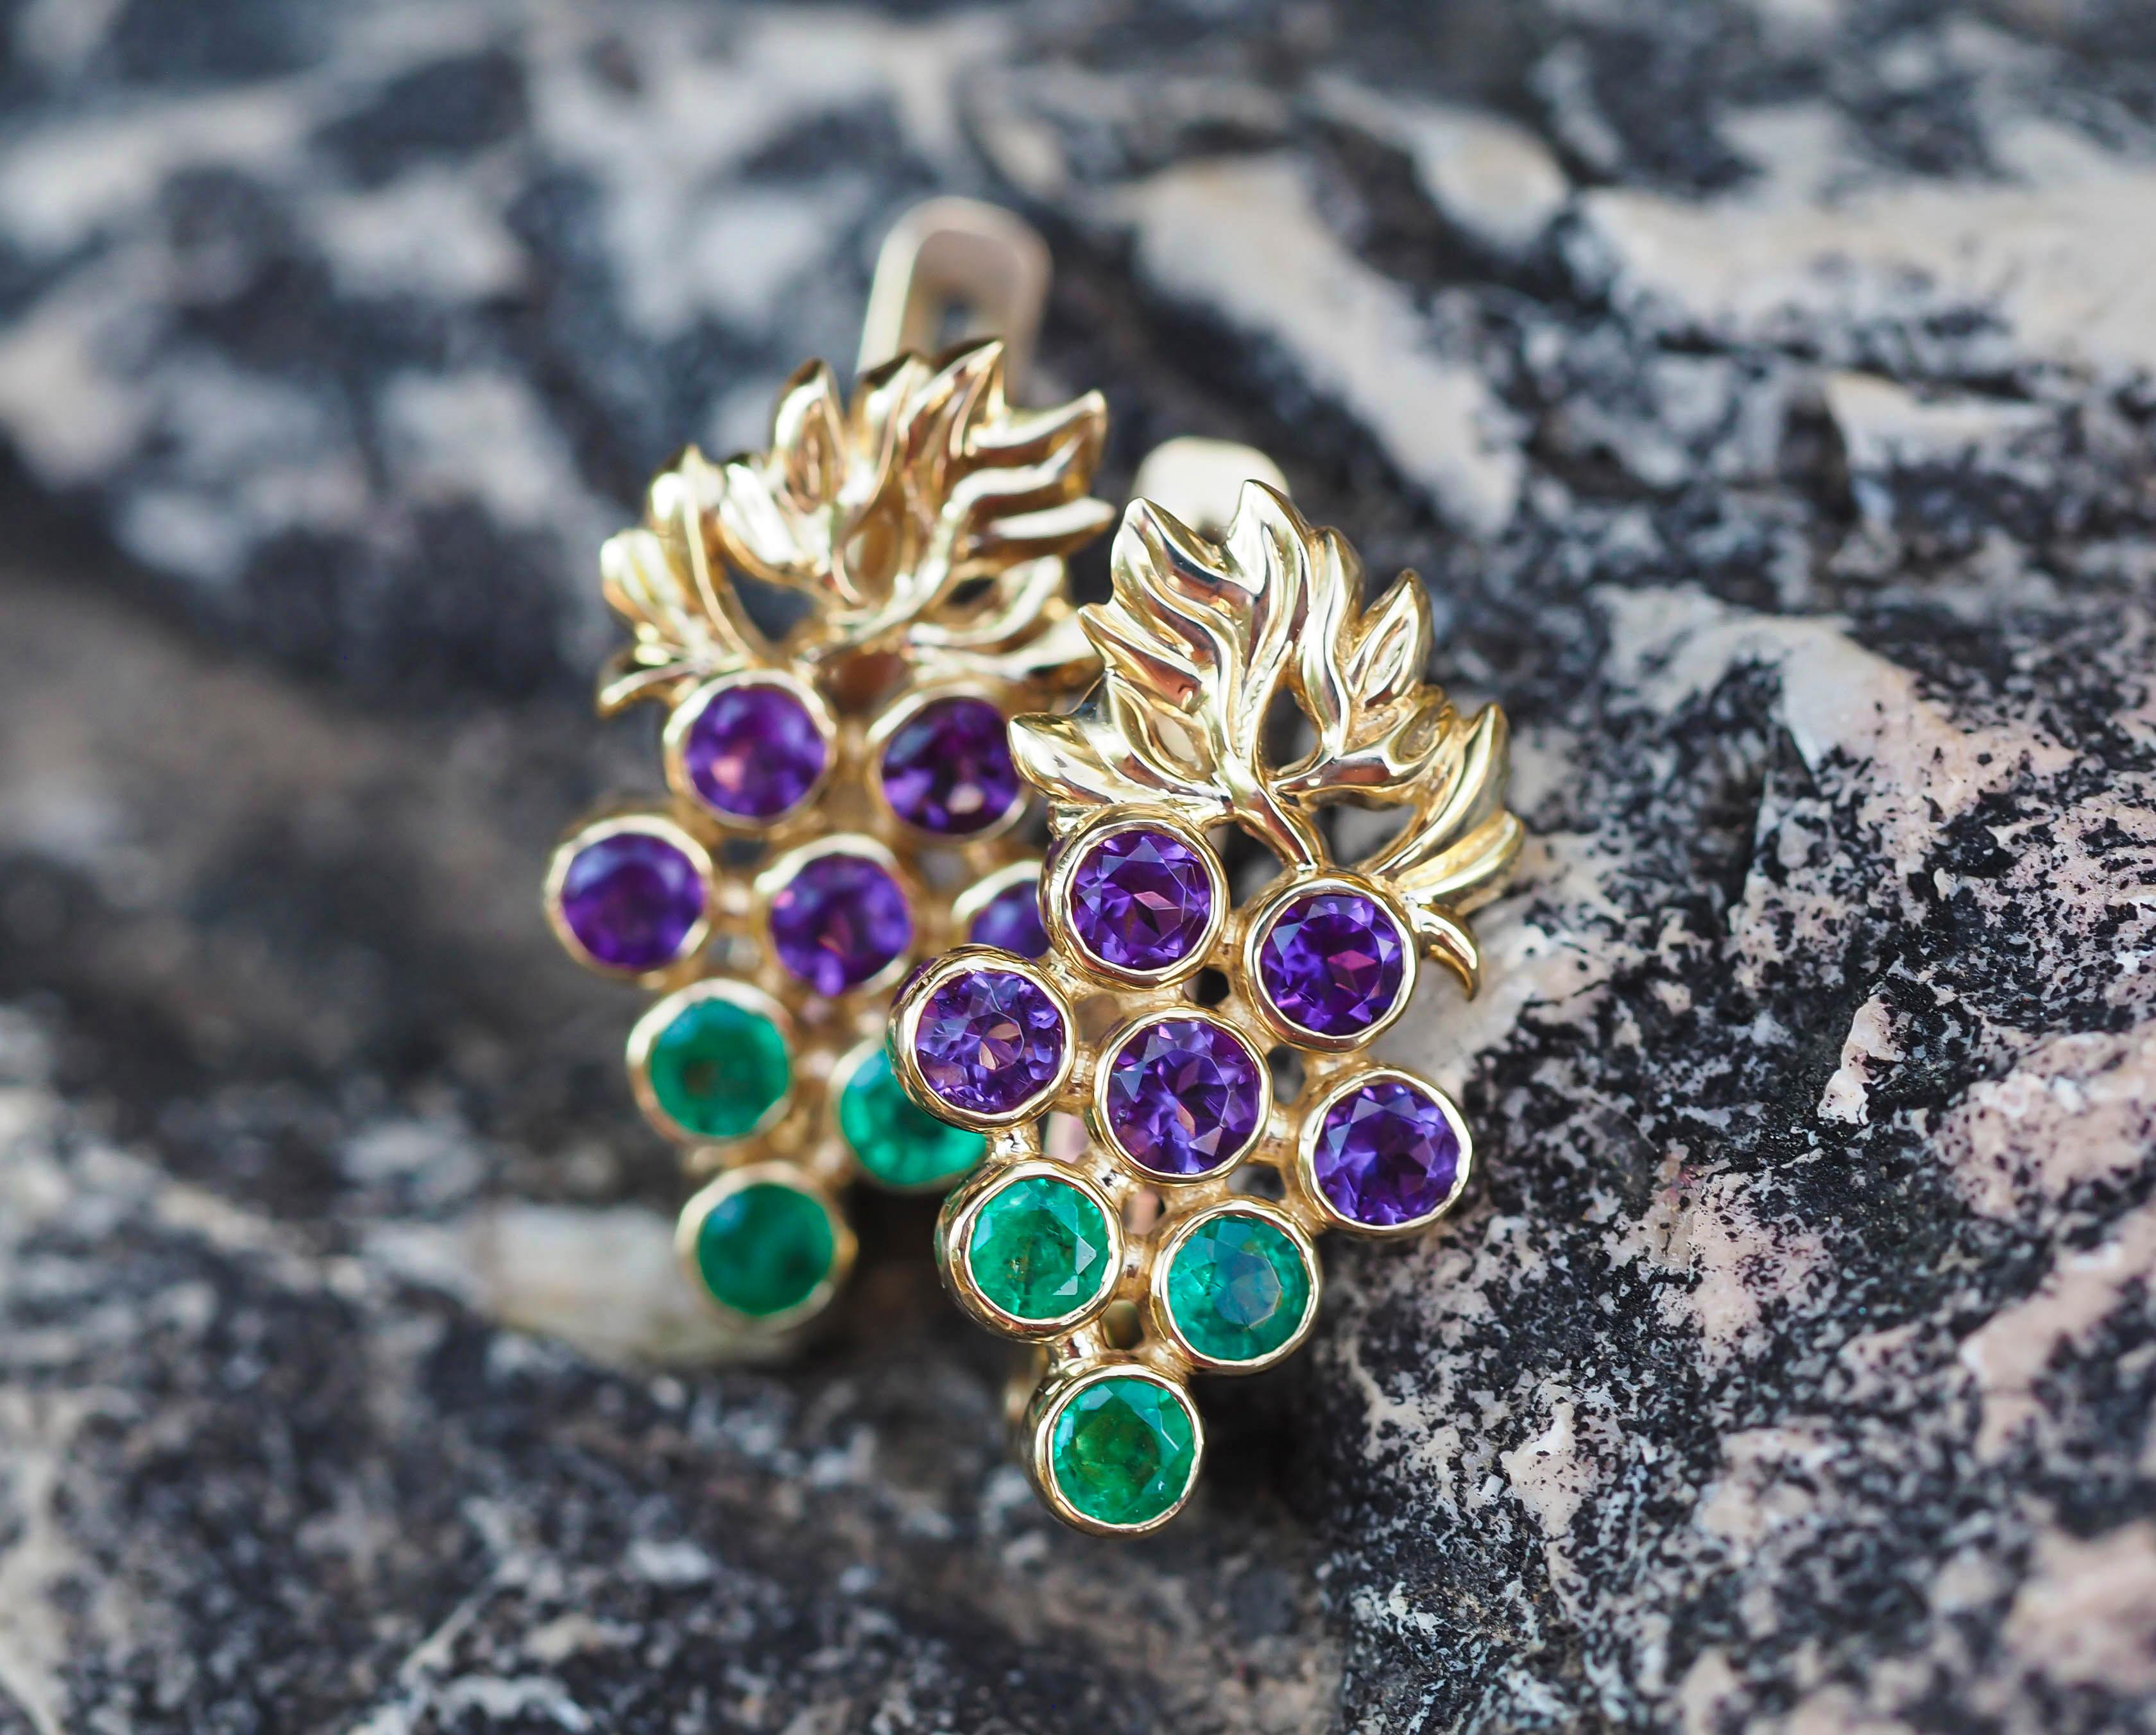 14k Gold Grape Earrings with Emeralds and Amethysts For Sale 3